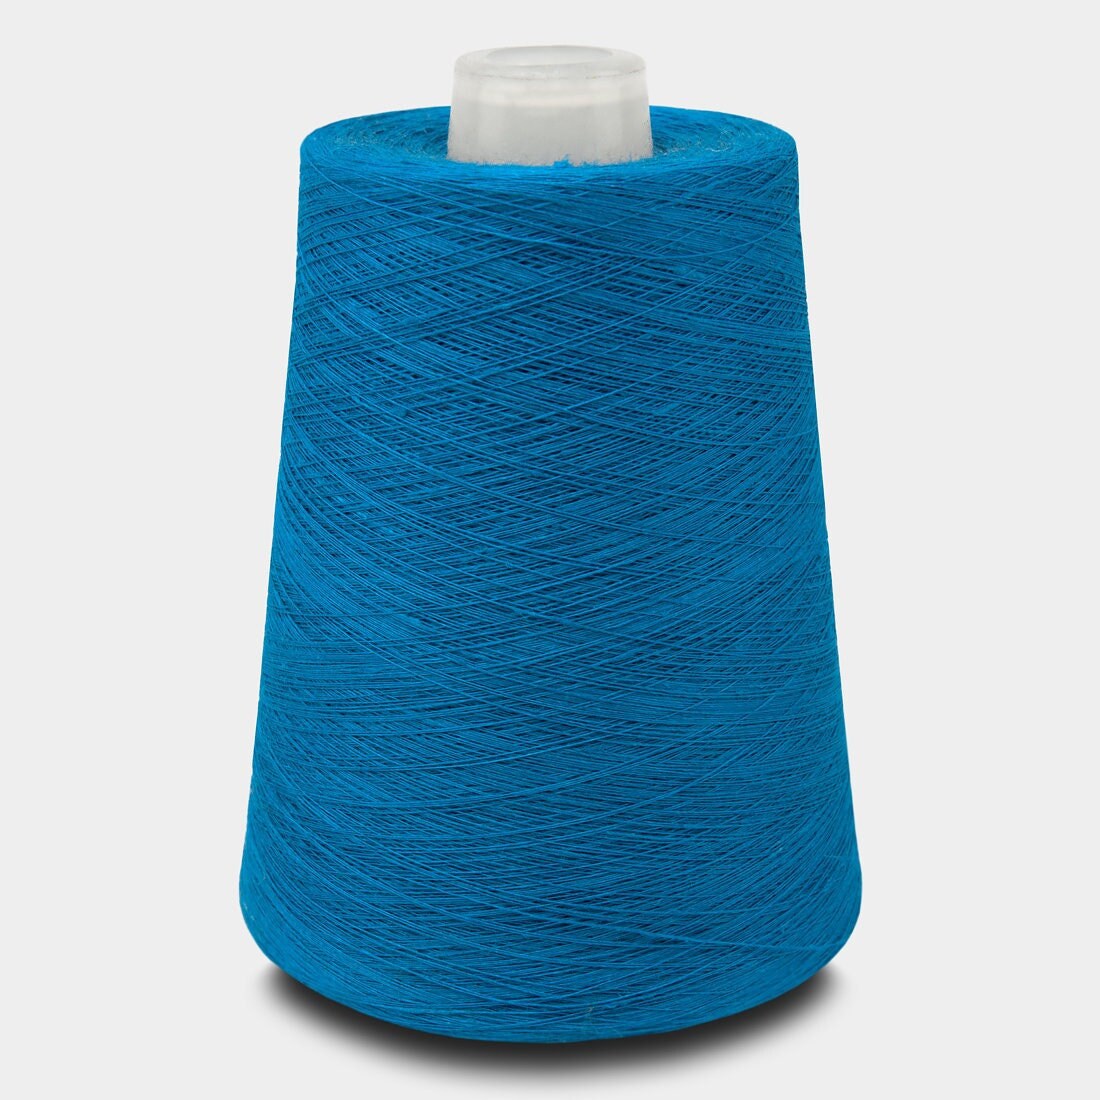  Electric Blue Yarn for Crocheting and Knitting Cotton